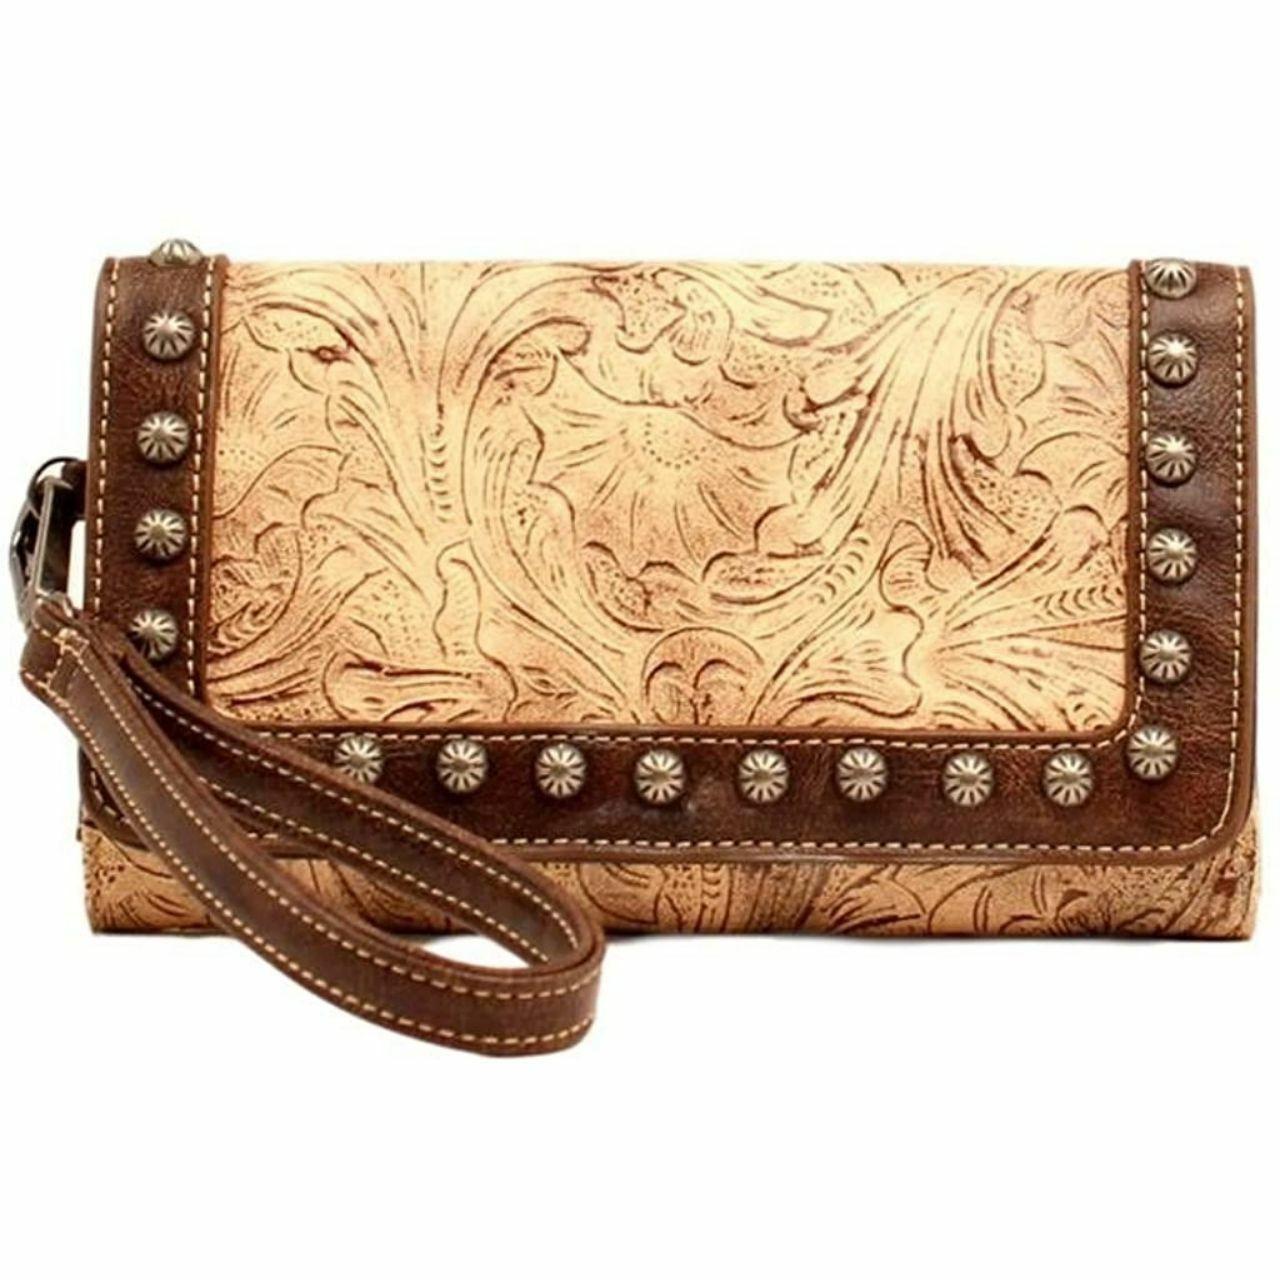 Taupe and Chocolate Floral Embossed Clutch Wallet |N7511241